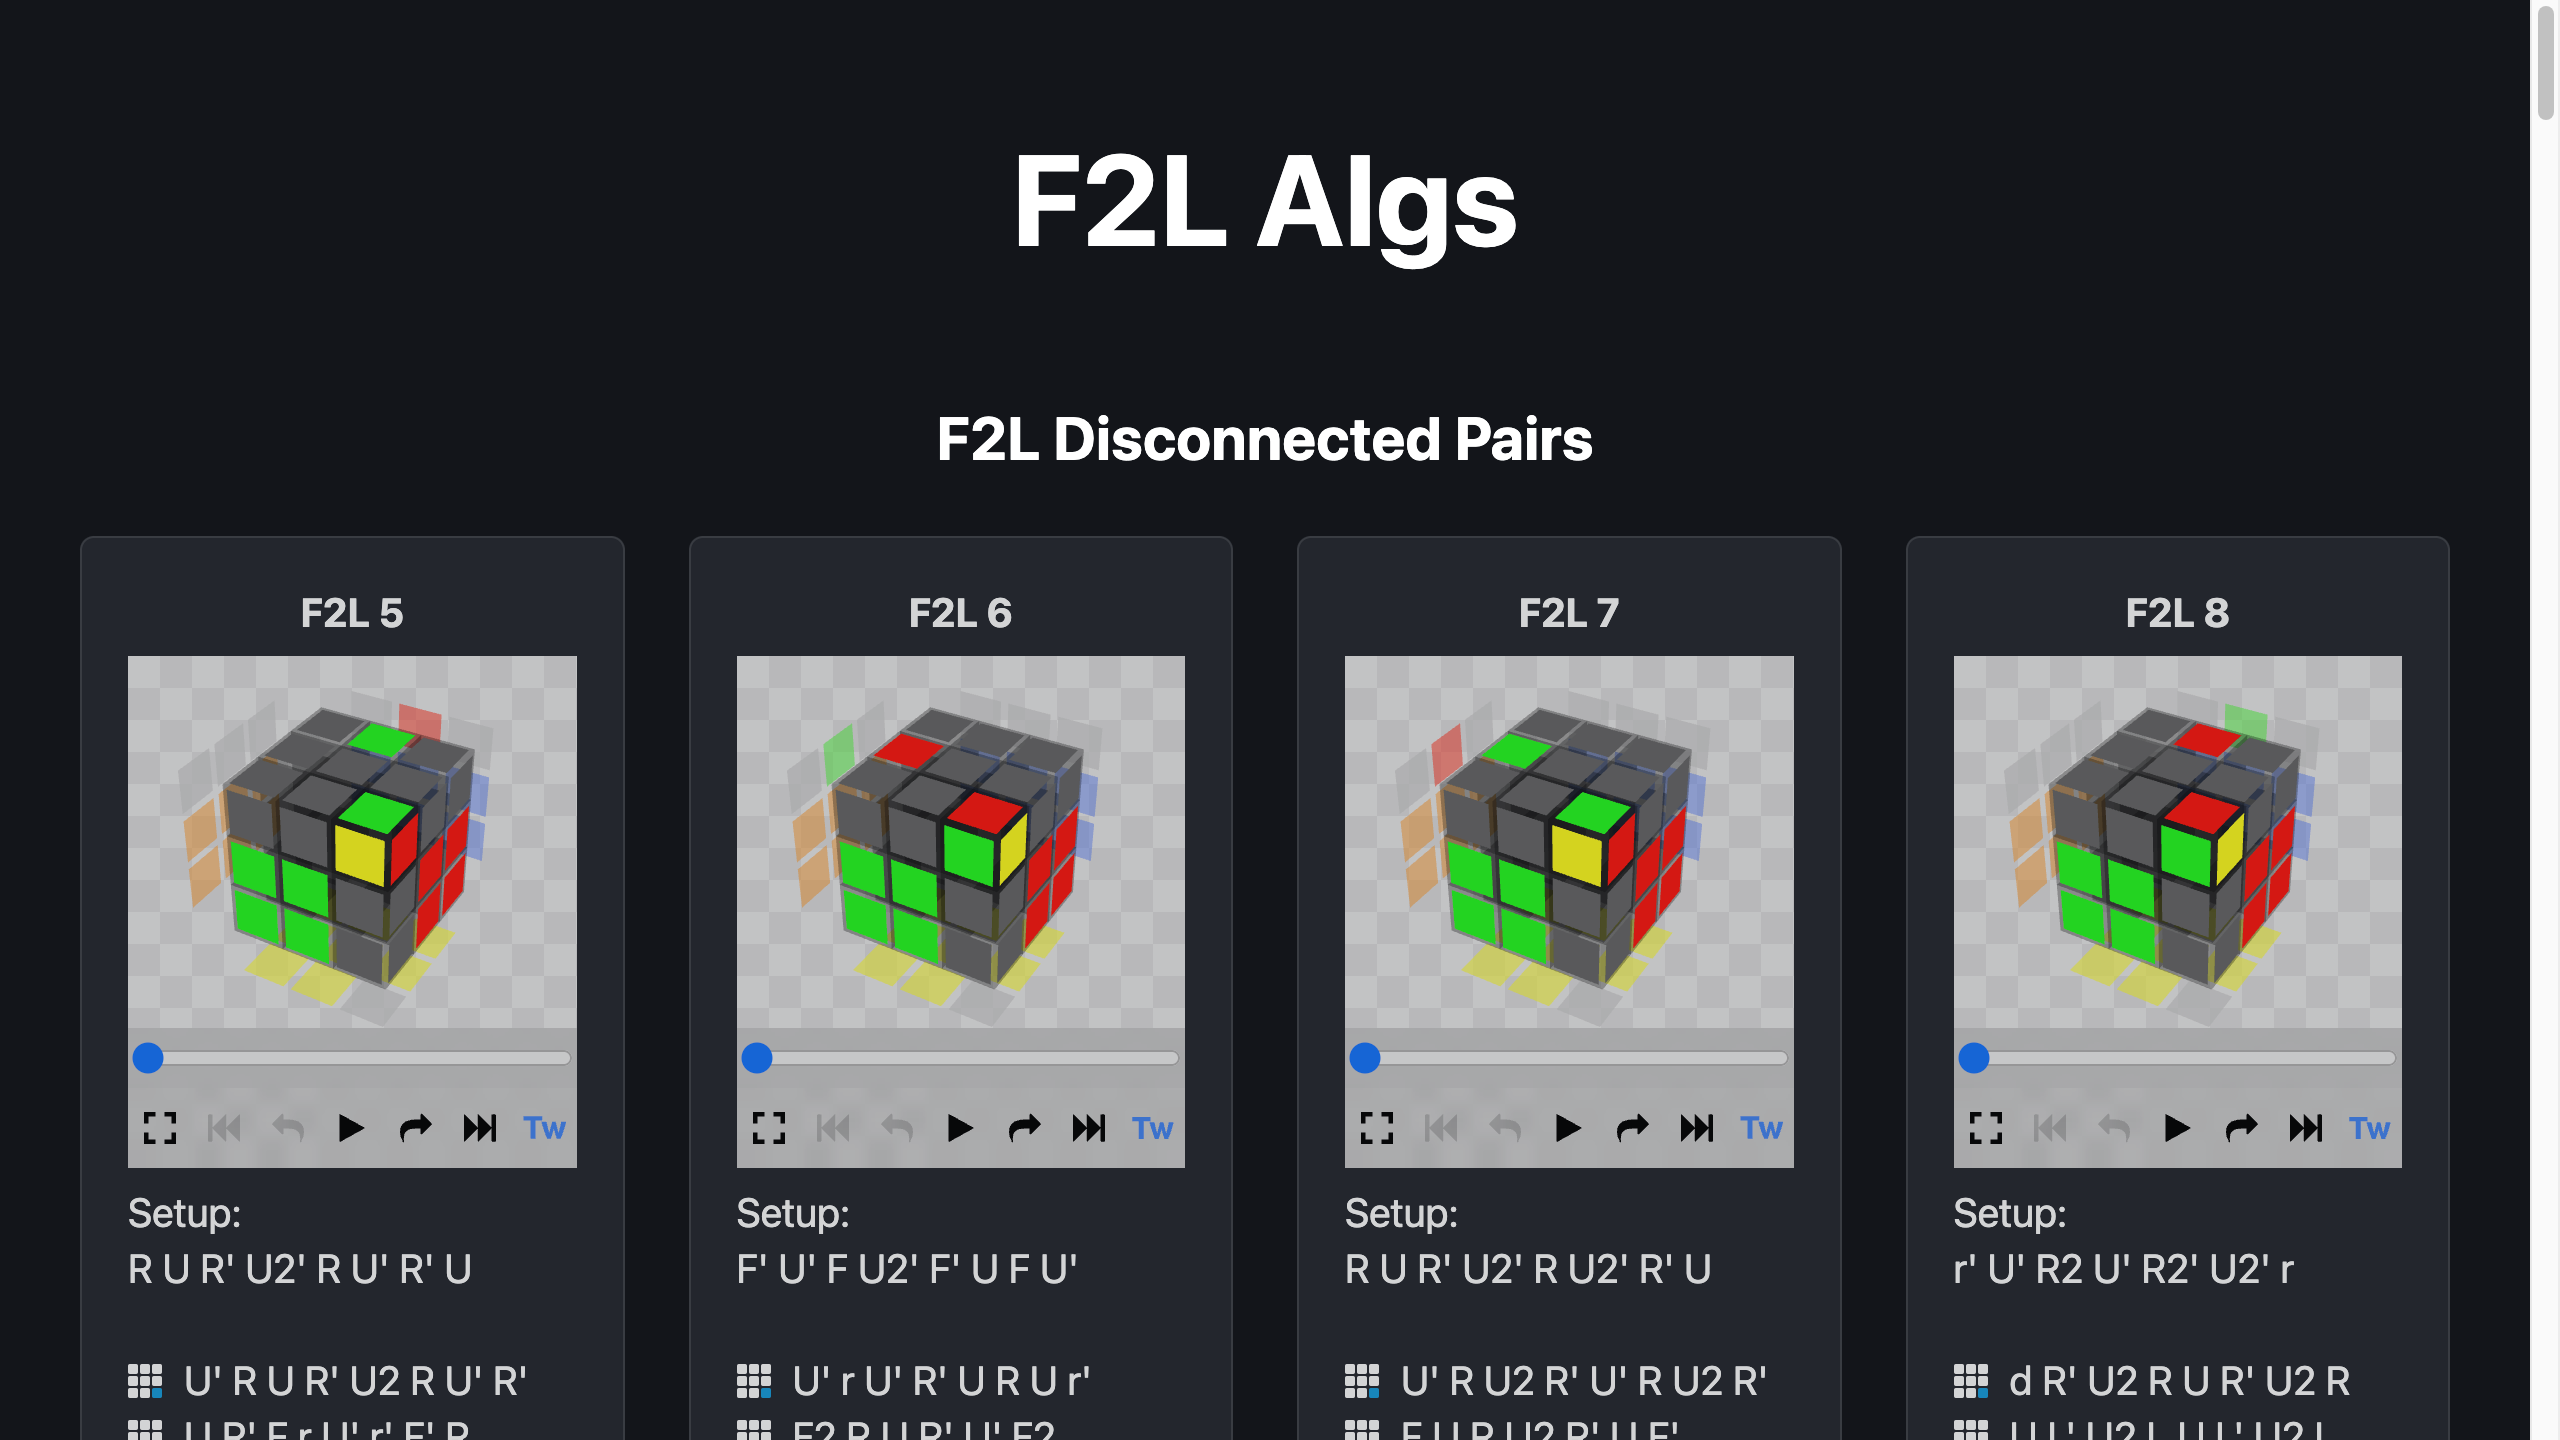 Screenshot of the F2L Algs page